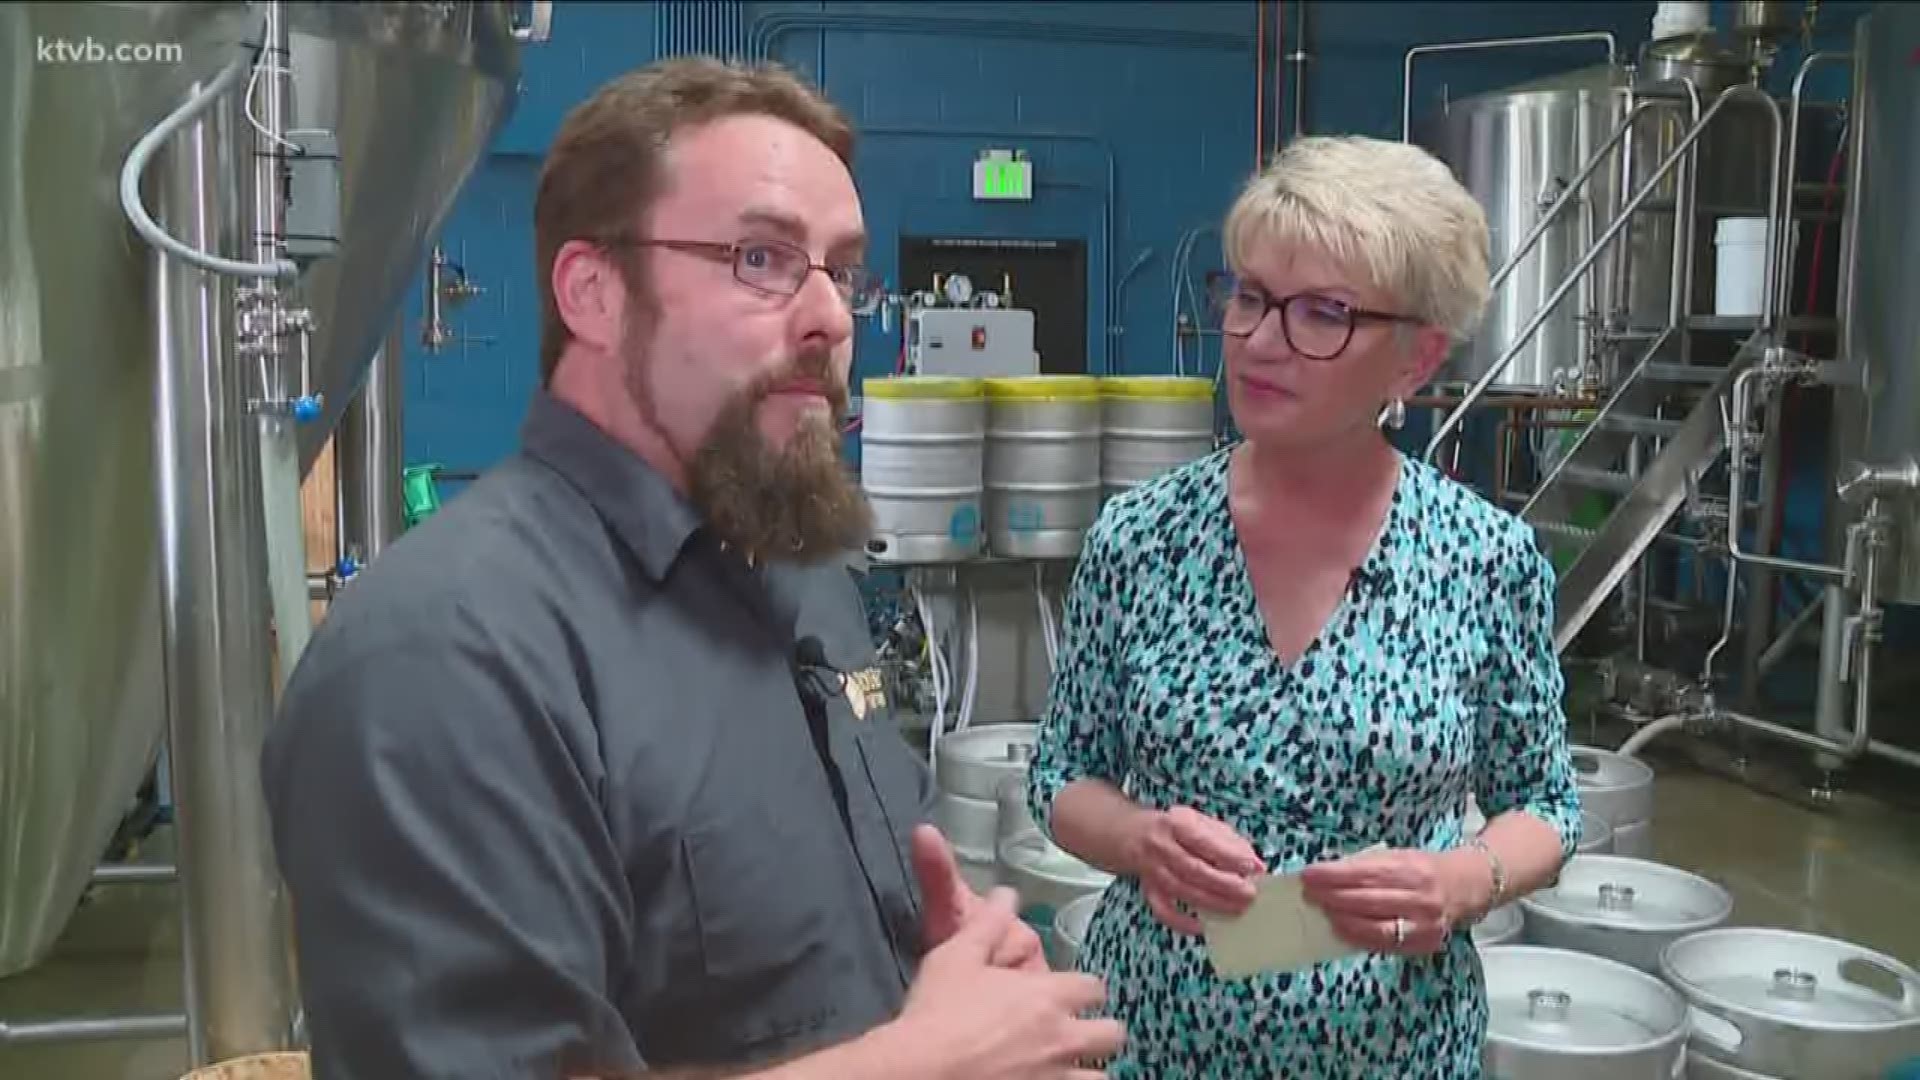 Boise Brewing recently won a gold medal for its beer.